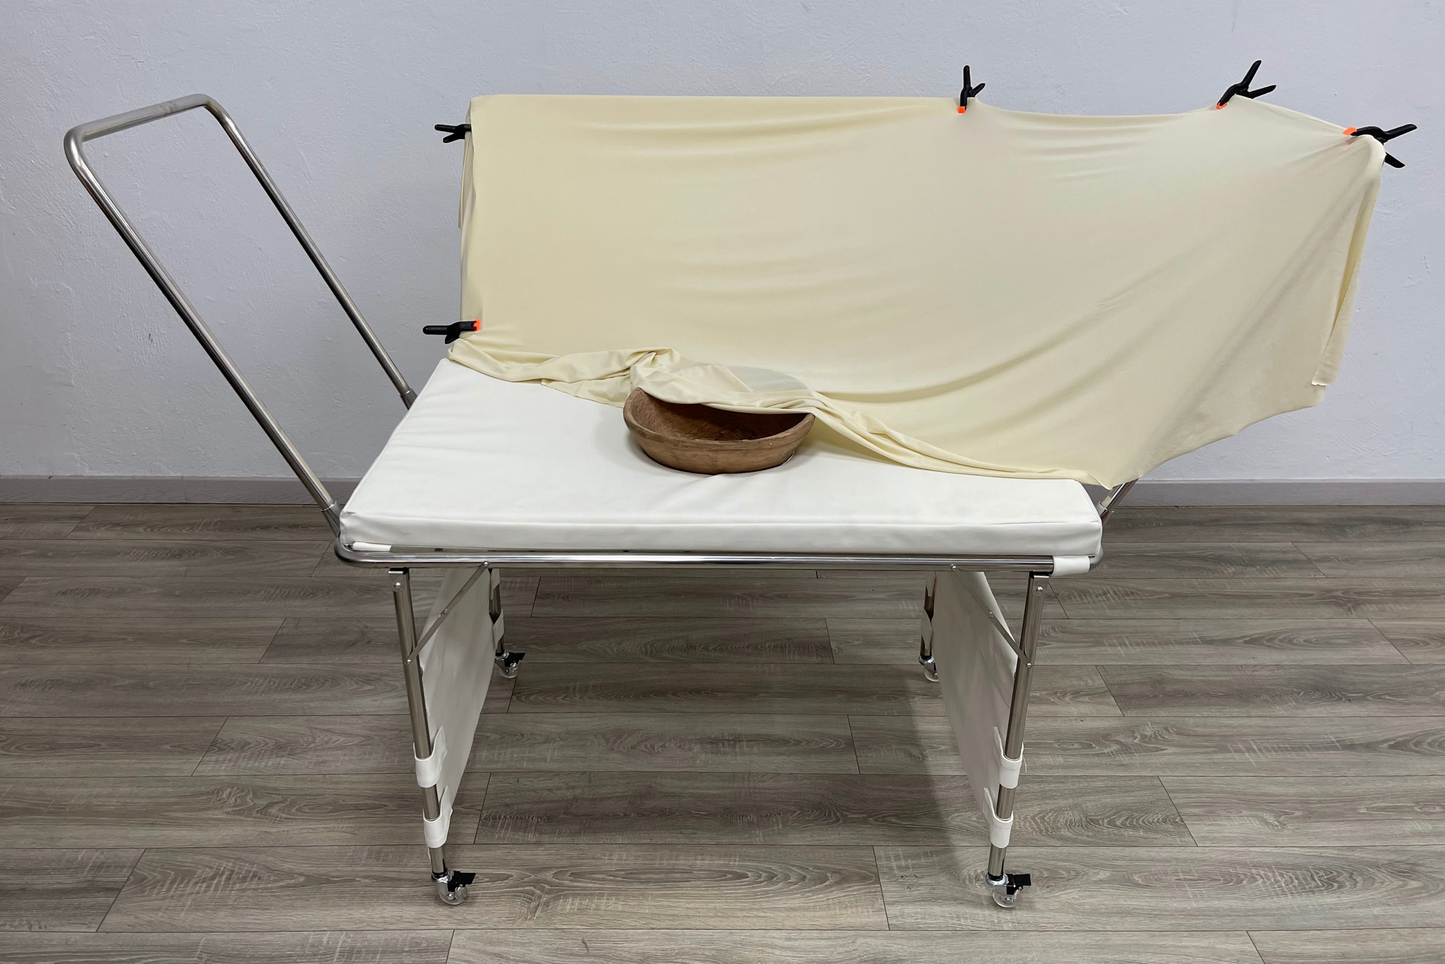 Unlike Paloma Schell Easy Table, we ship this posing table for newborn photography super-fast from California USA the same day you order.